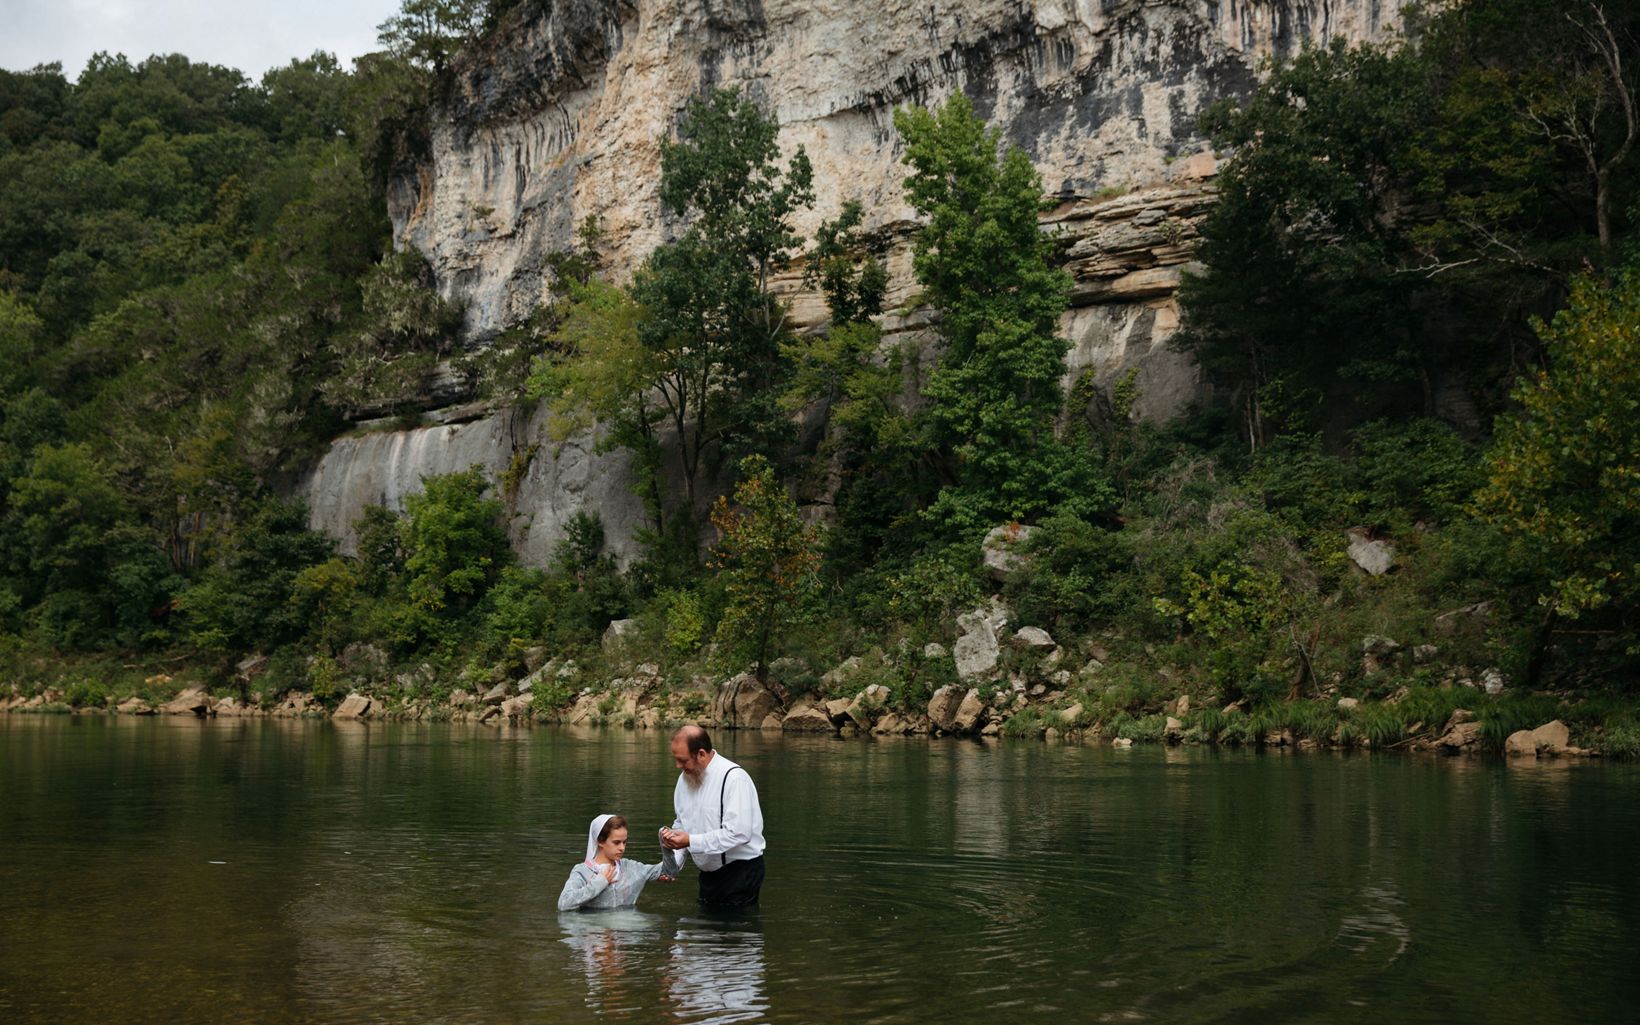 
                
                  River Baptism  Abigail Bear is baptized in the Buffalo River. She and another young adult member of their Mennonite church congregation were baptized on the same day here near St. Joe, AR.
                  © Terra Fondriest
                
              